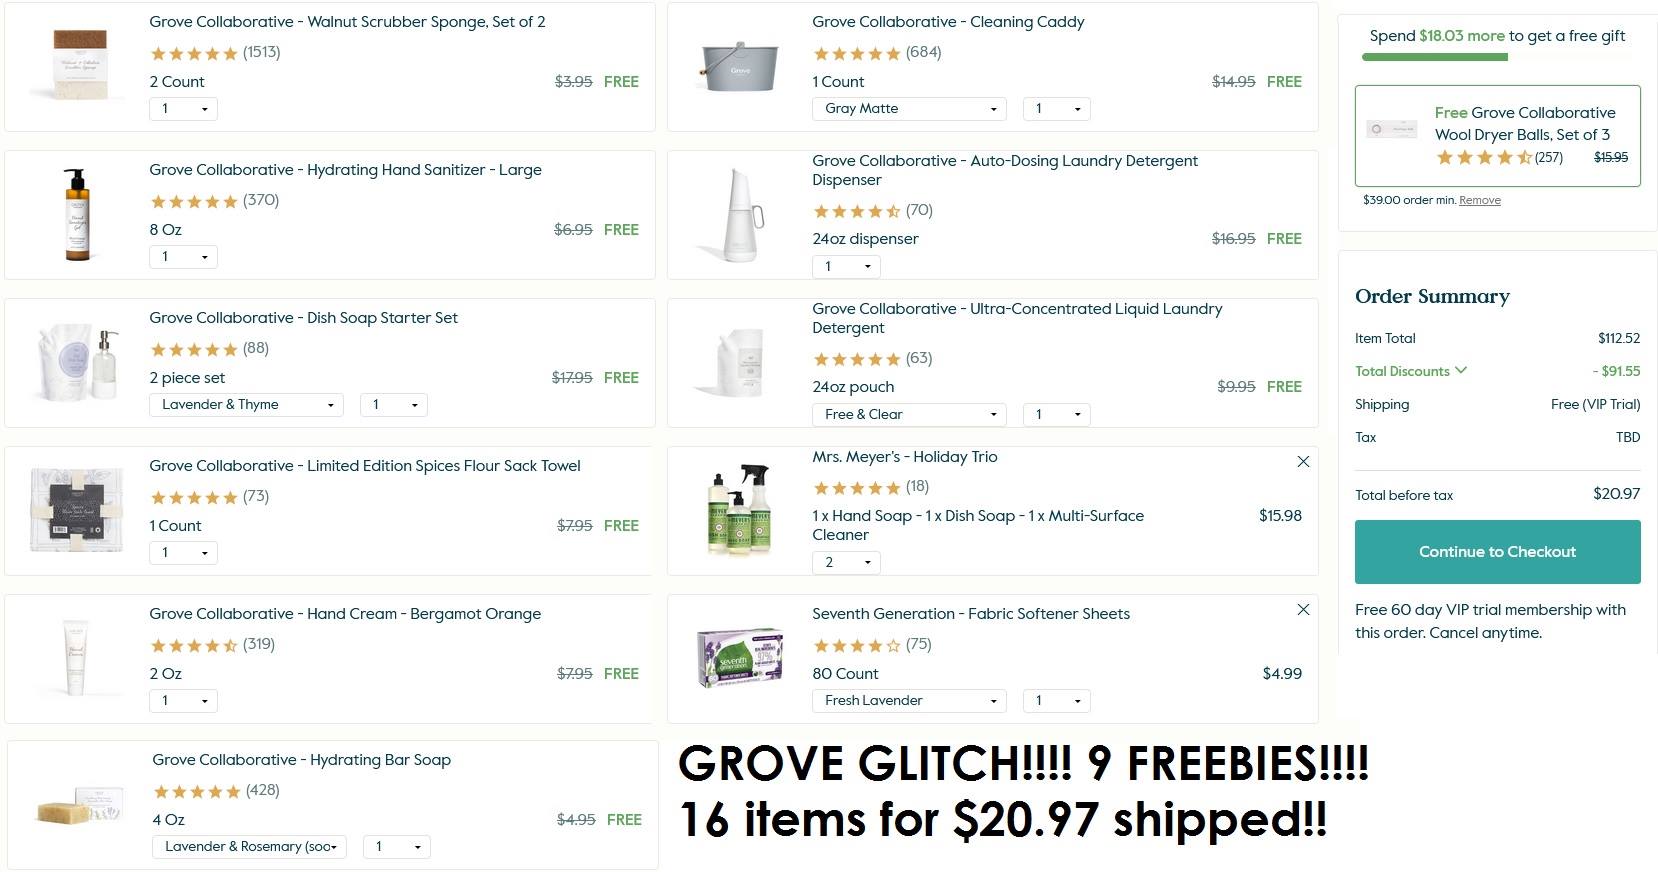 10 FREE ITEMS FROM GROVE (with...